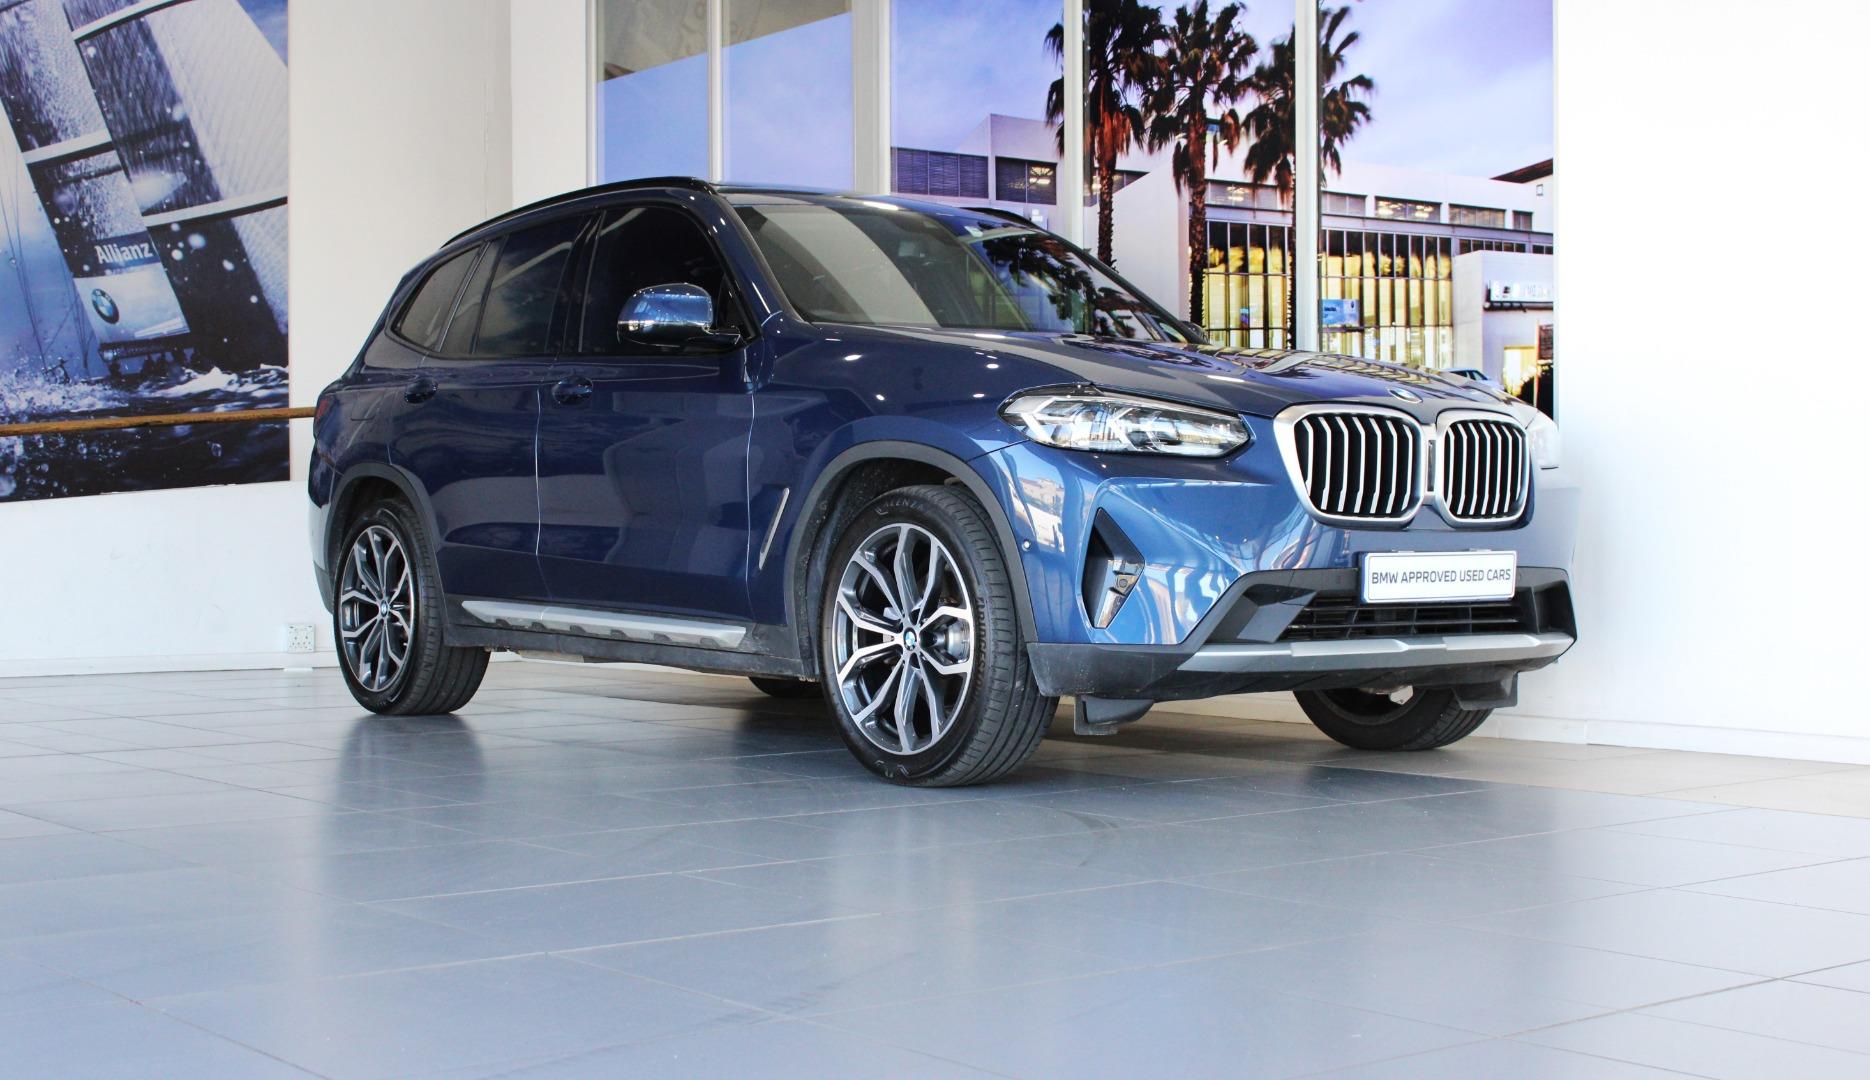 2022 BMW X3 XDrive20d  for sale - SMG12|USED|115271